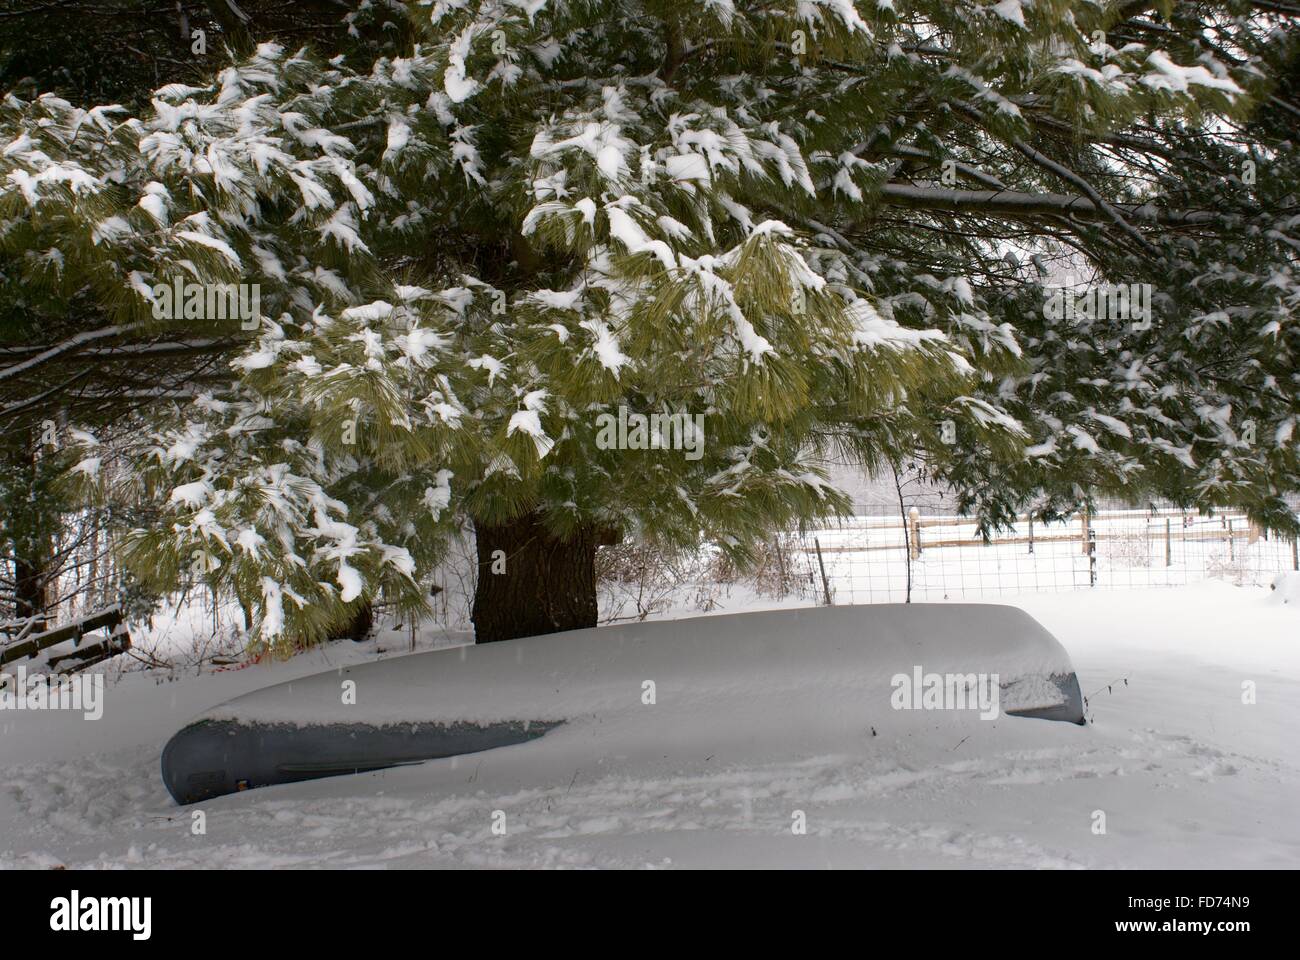 Winter snow photo of trees with a wooden fence in the back ground and a canoe under the tree covered in snow. Stock Photo